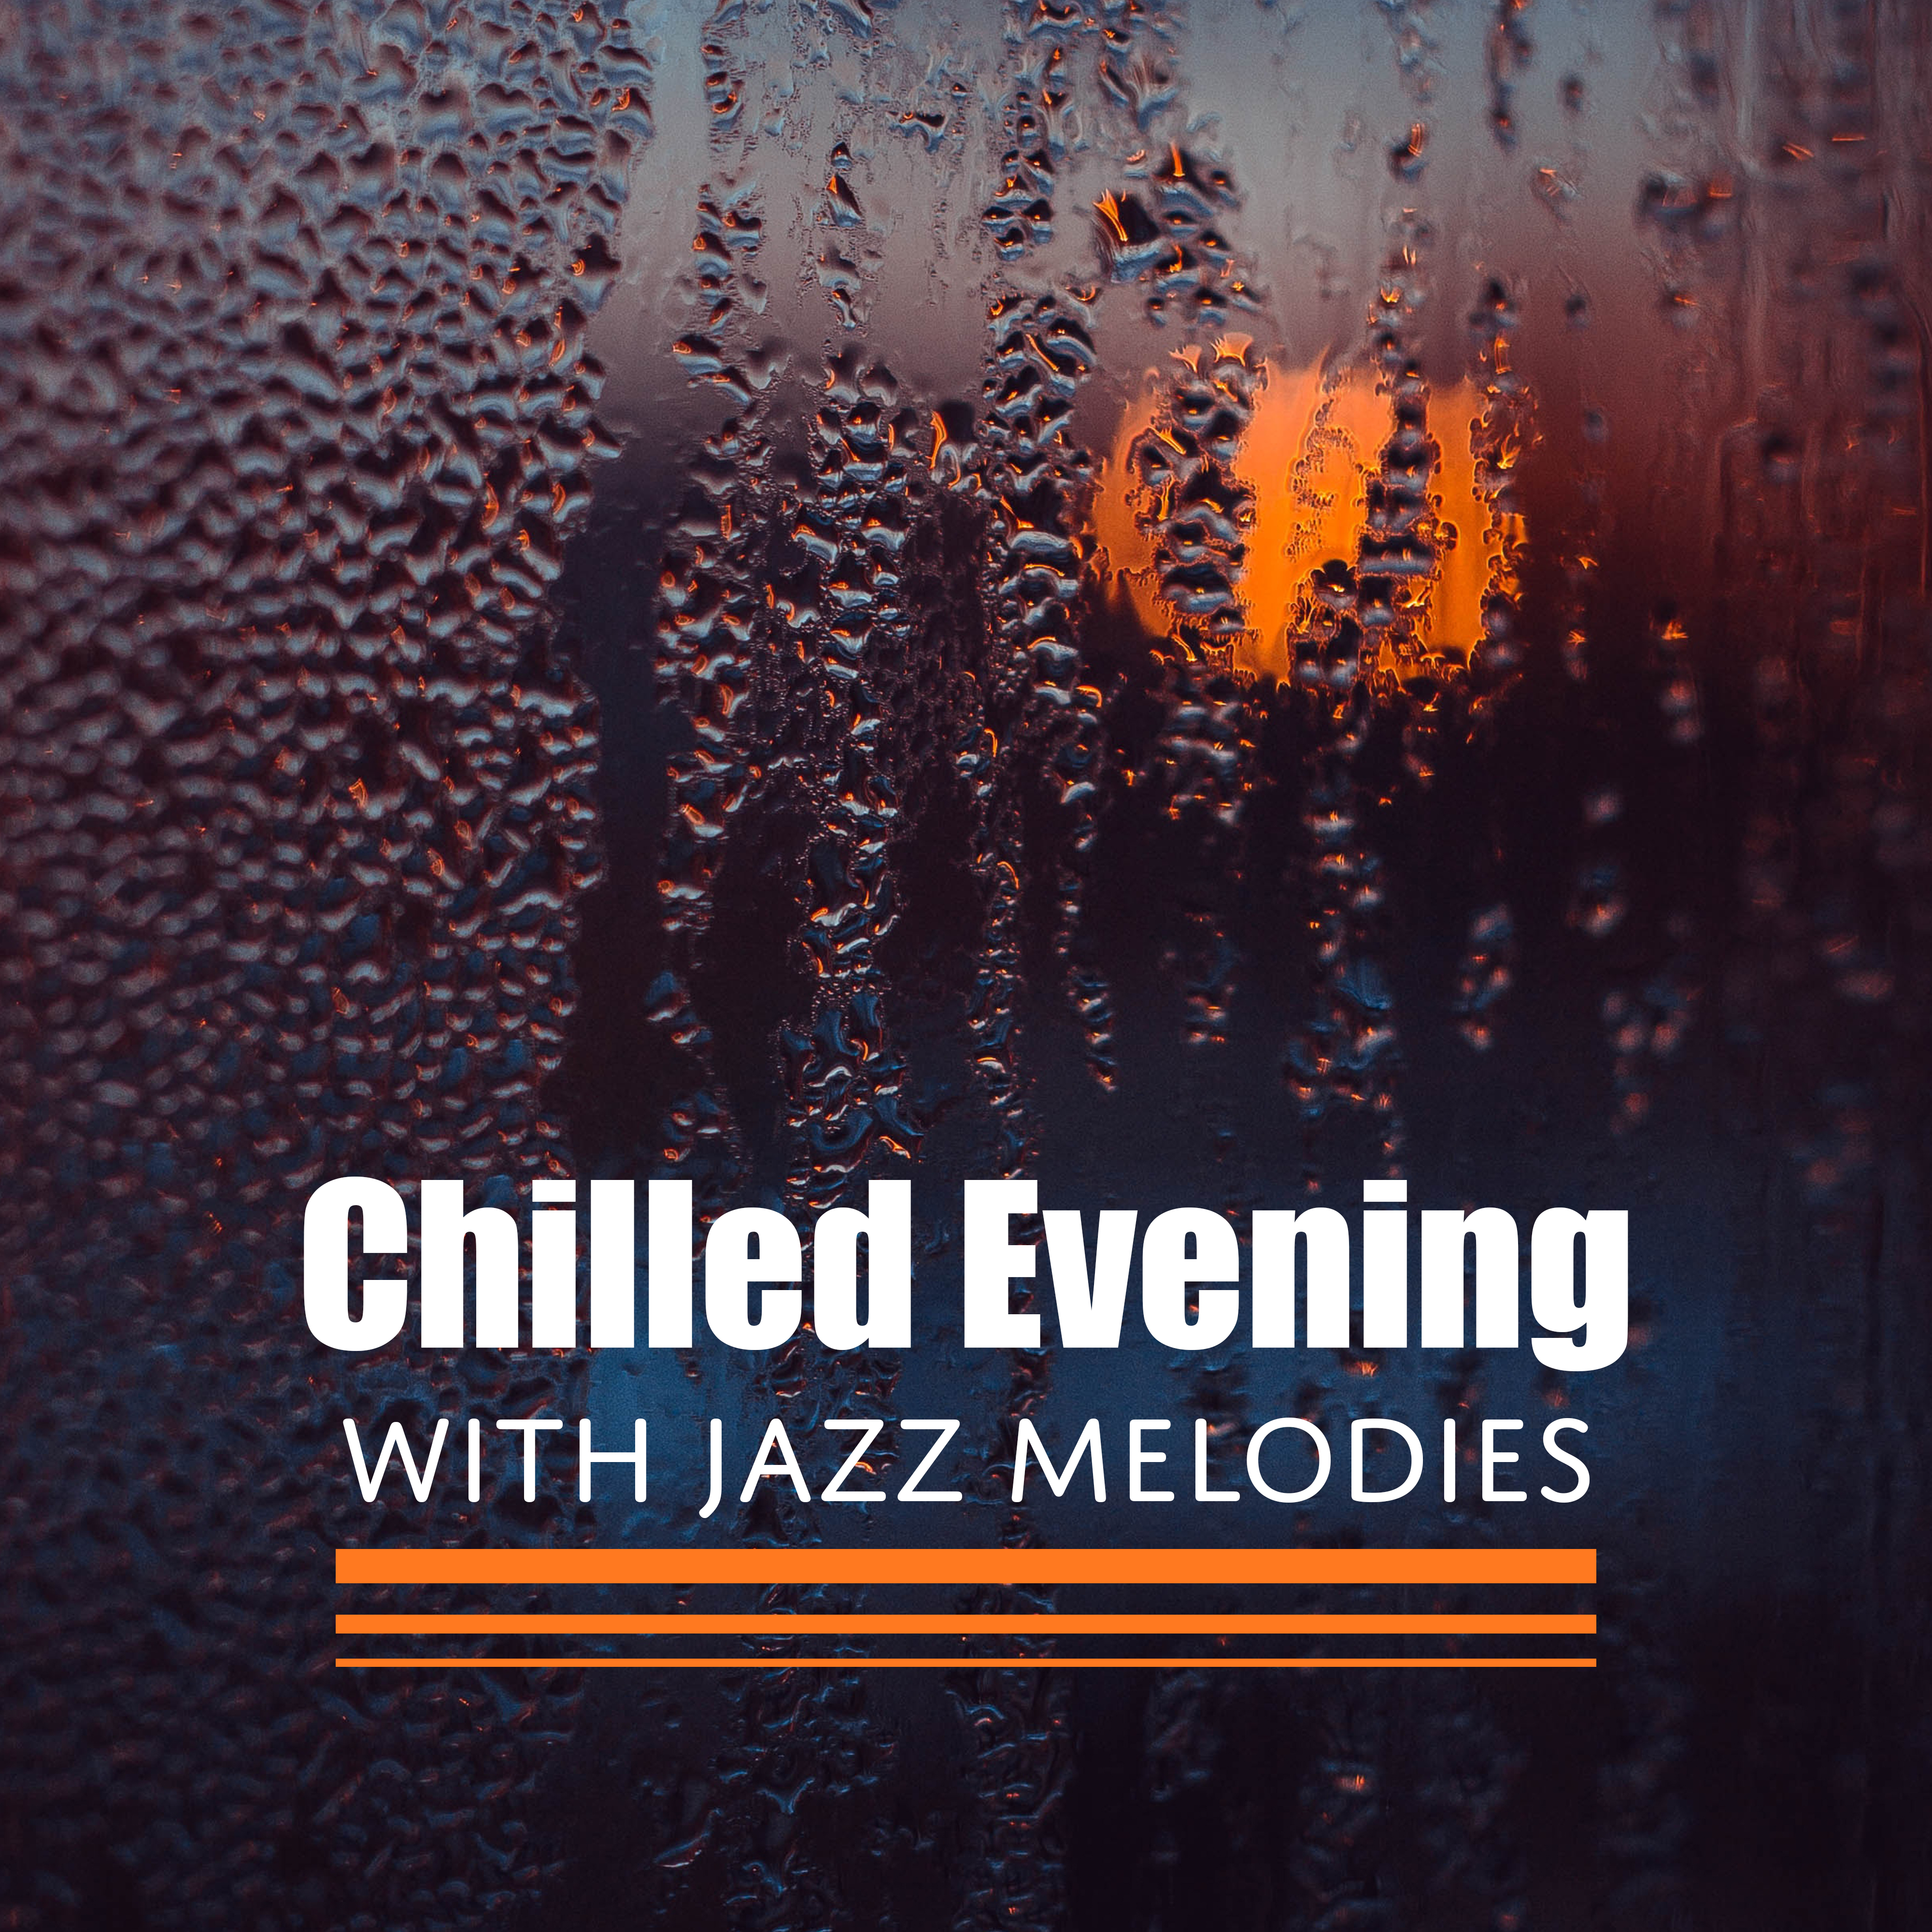 Chilled Evening with Jazz Melodies